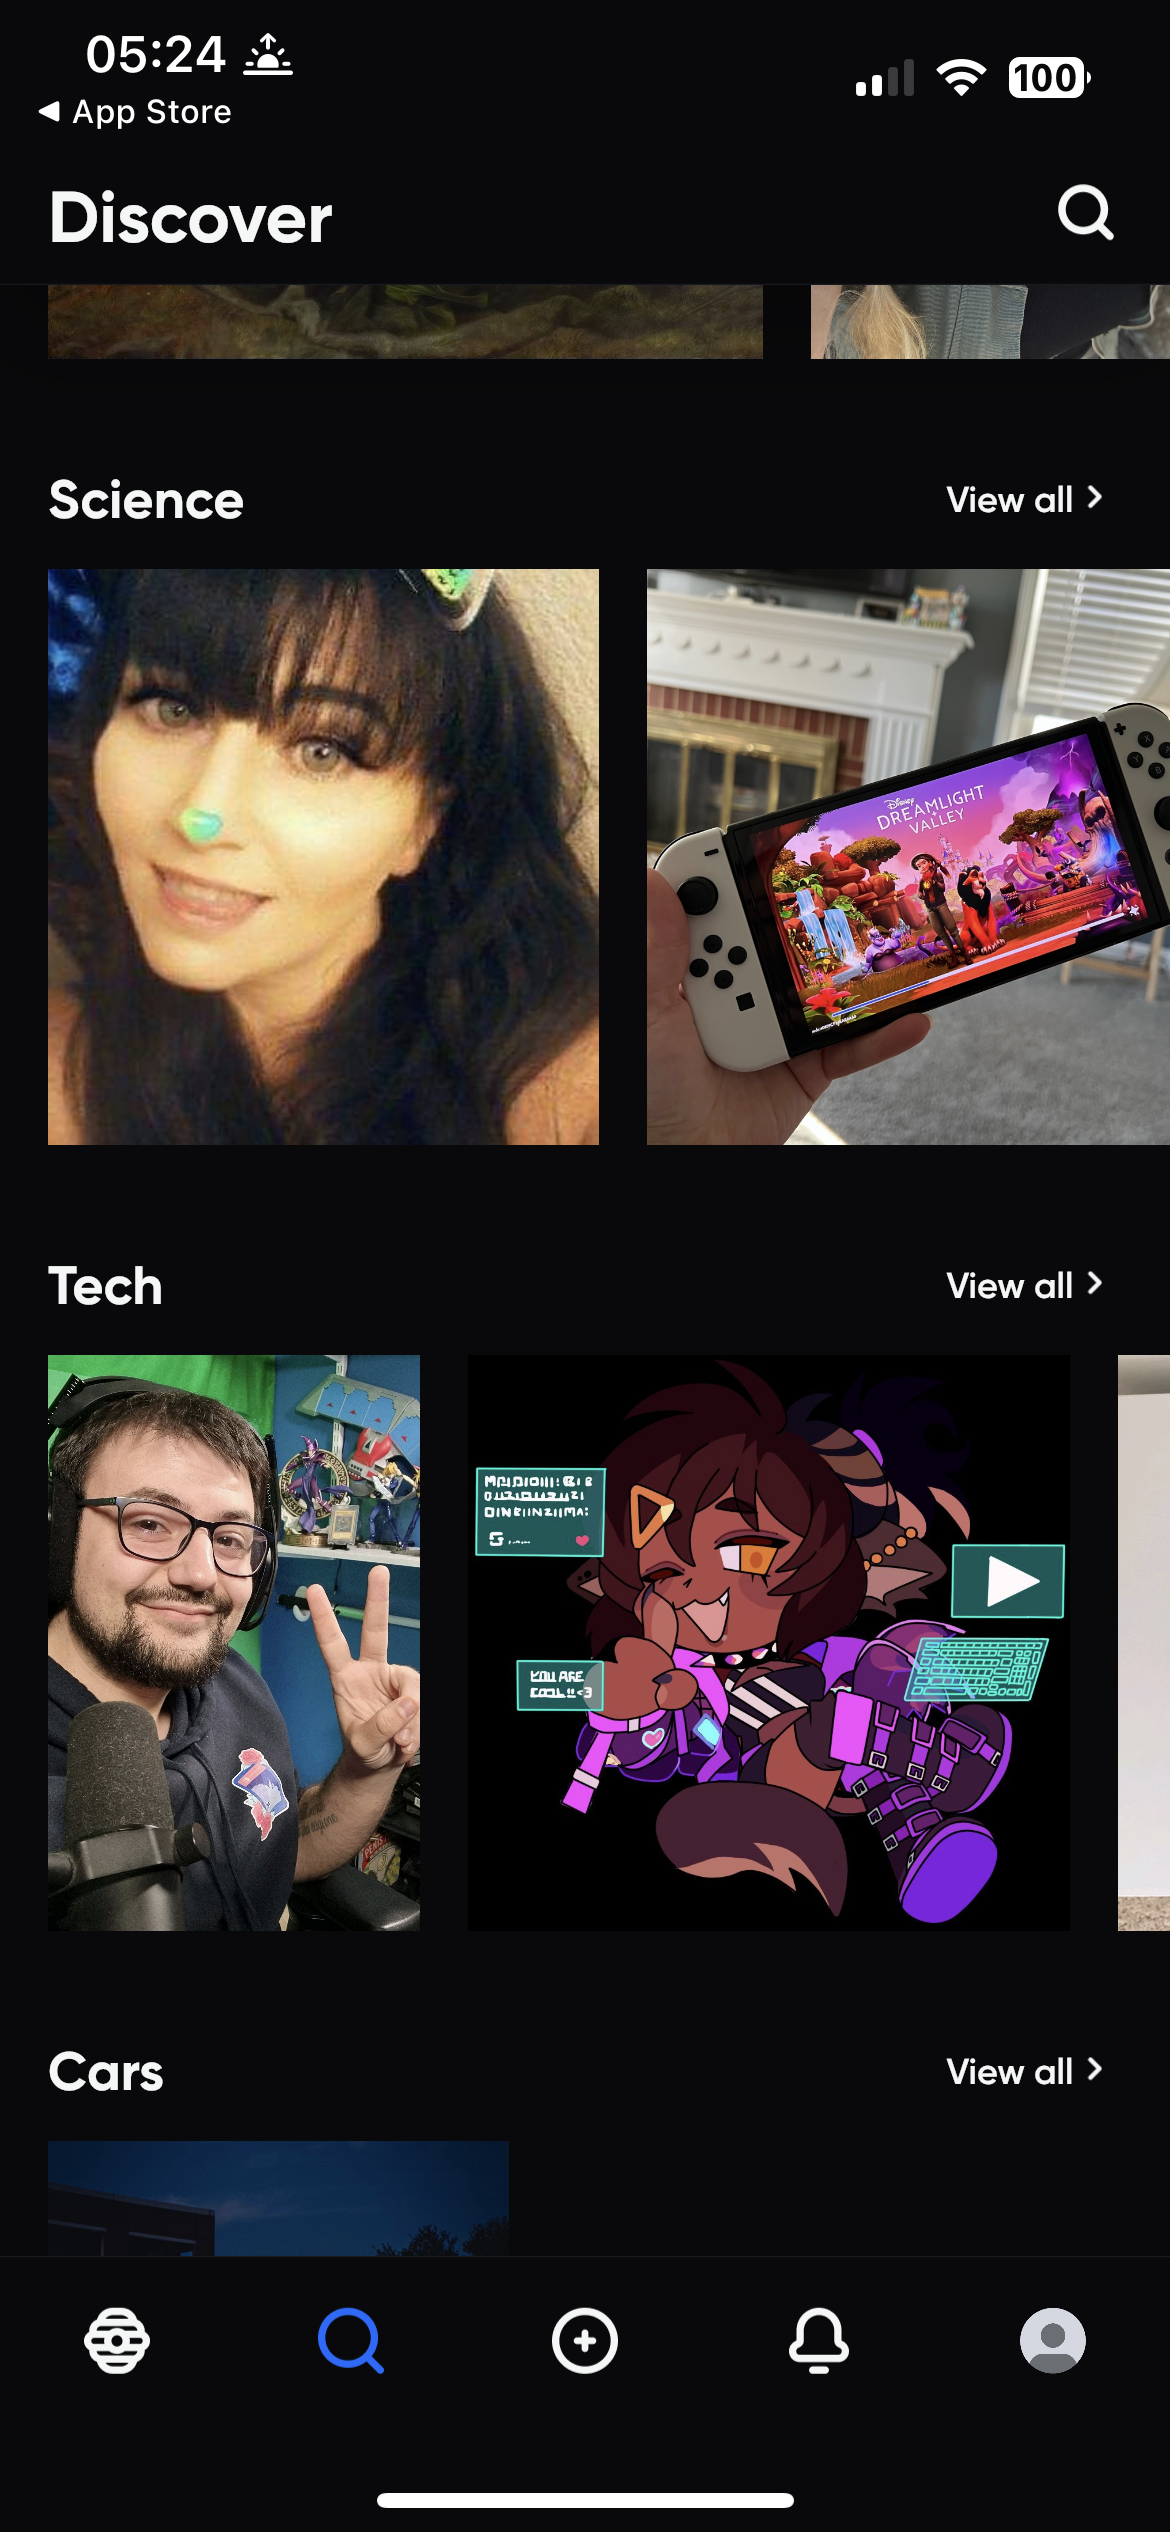 screenshot of hive that shows the topic of science and tech with unrelated pictures. Science: the face of a woman and one with a switch. Tech: one with a man and headset and one anime-like picture of a cat-girl woth a keyboard.